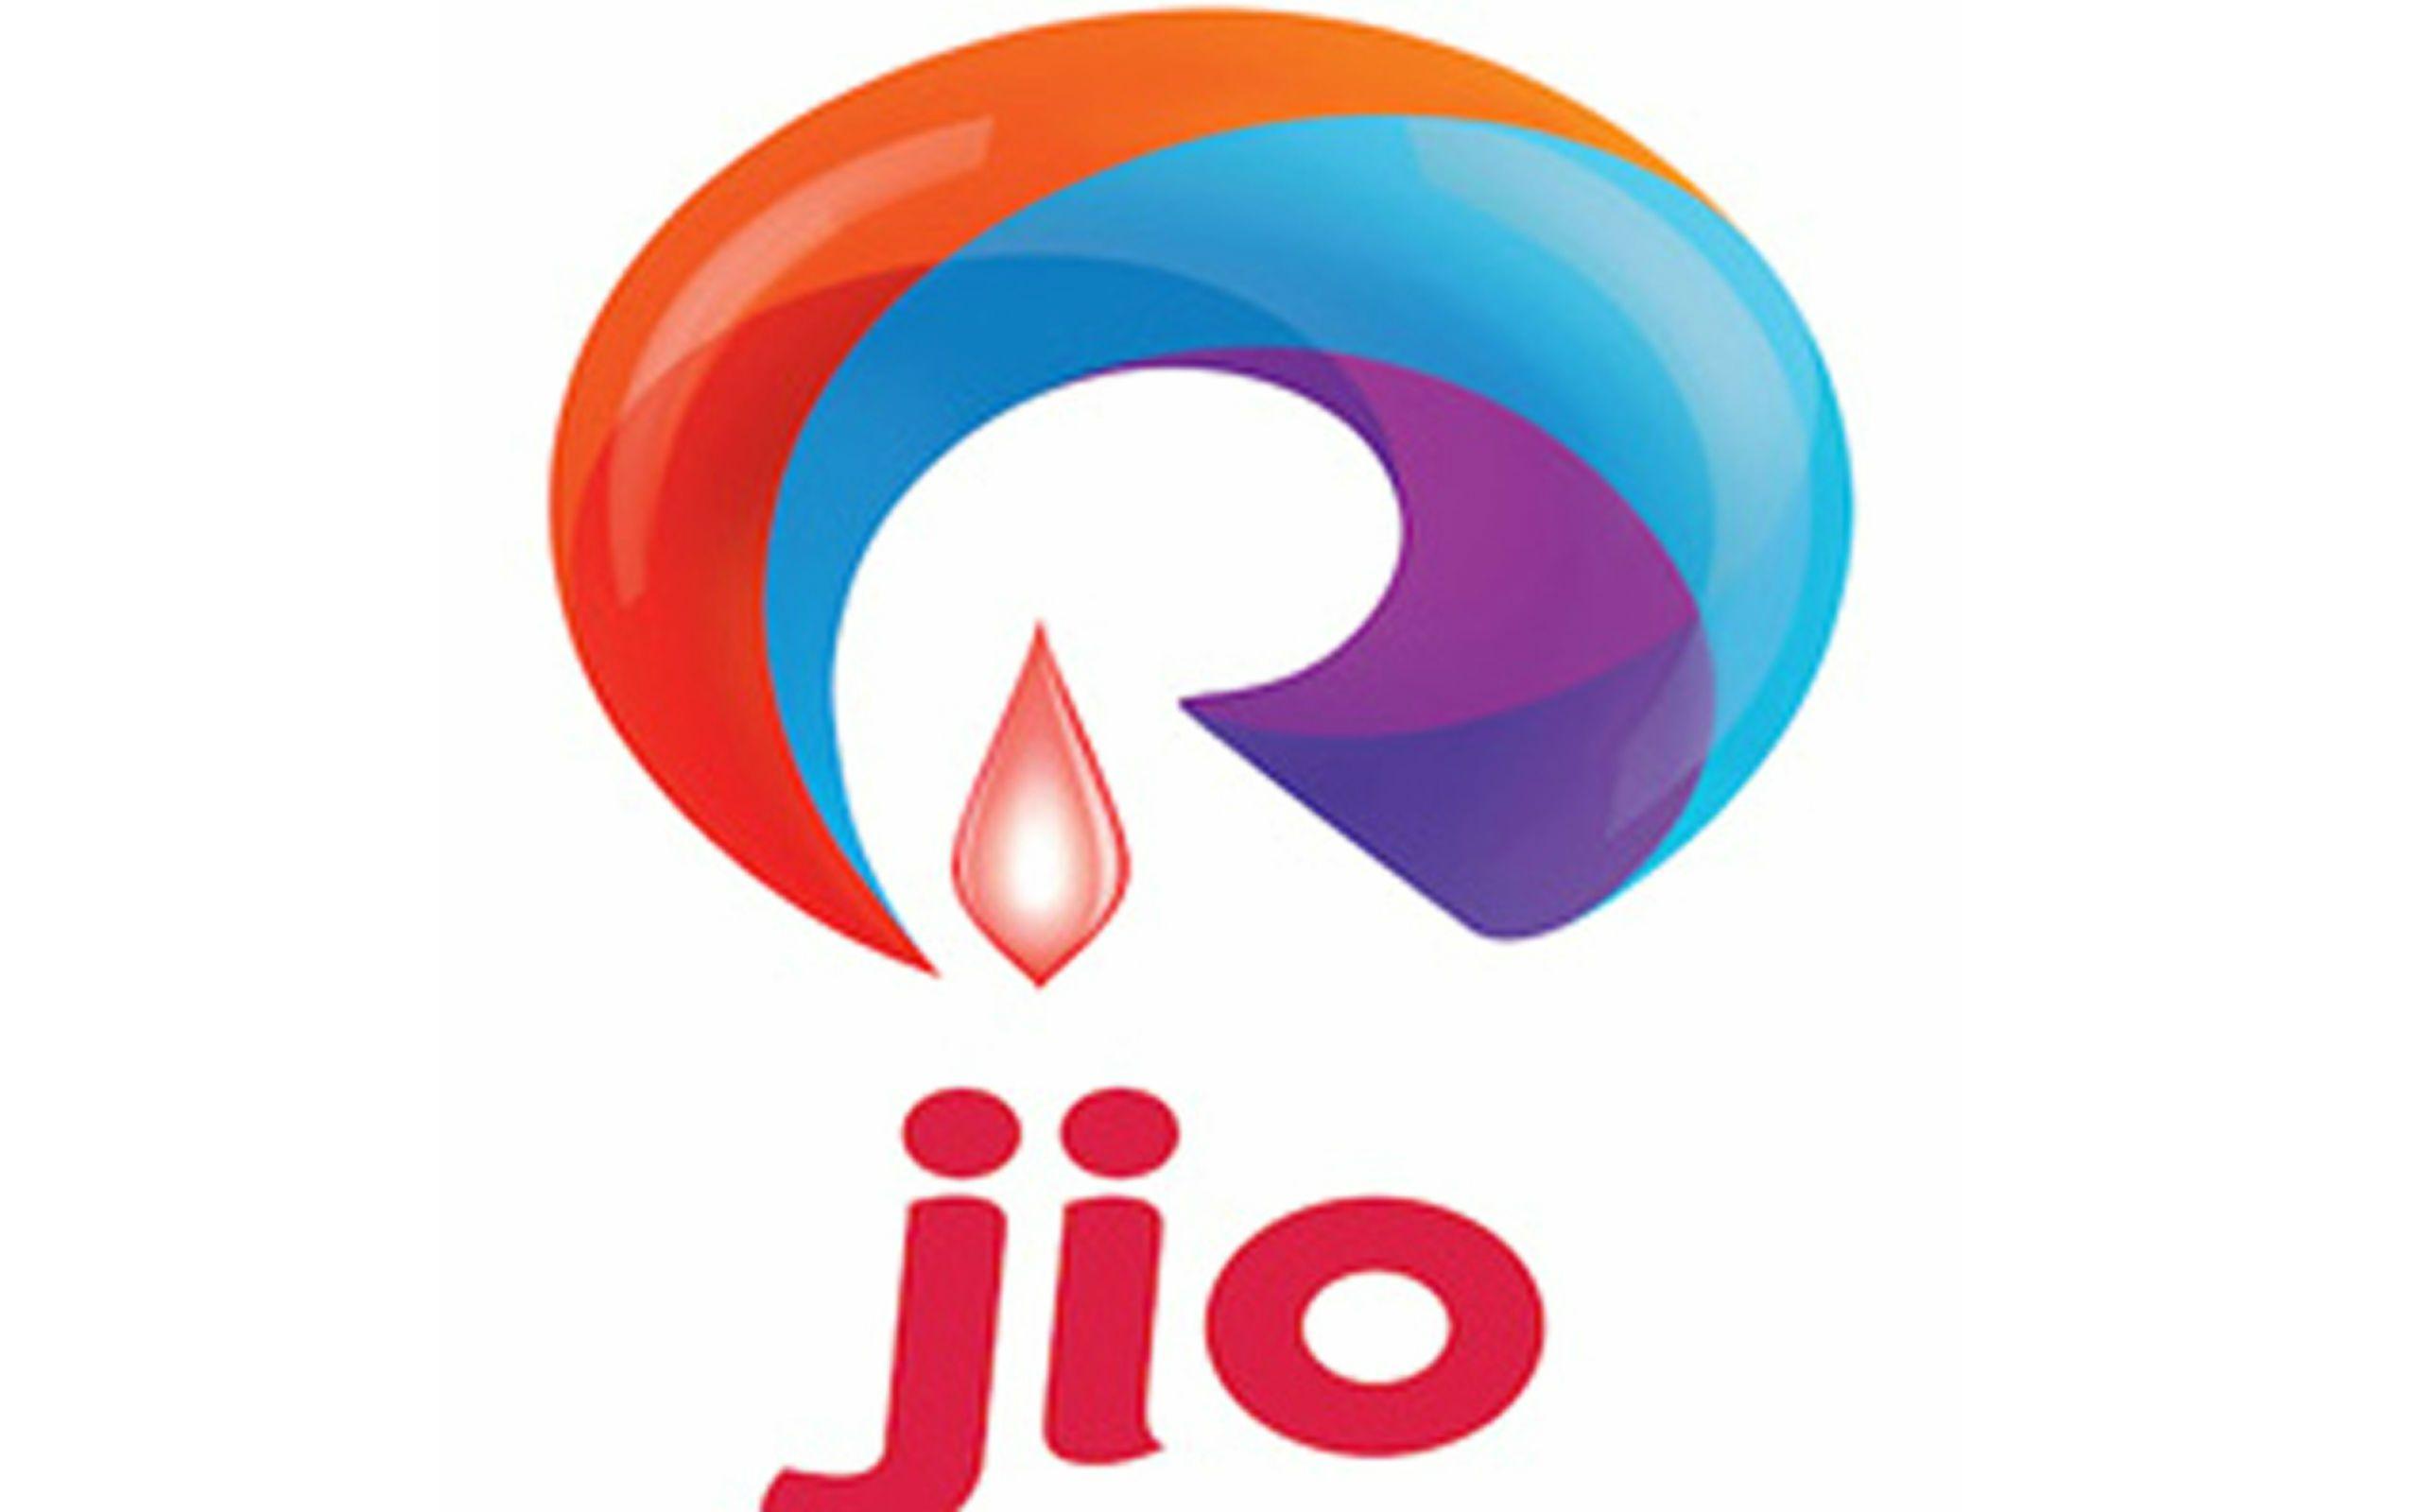 Hd Wallpapers For Mobile Jio